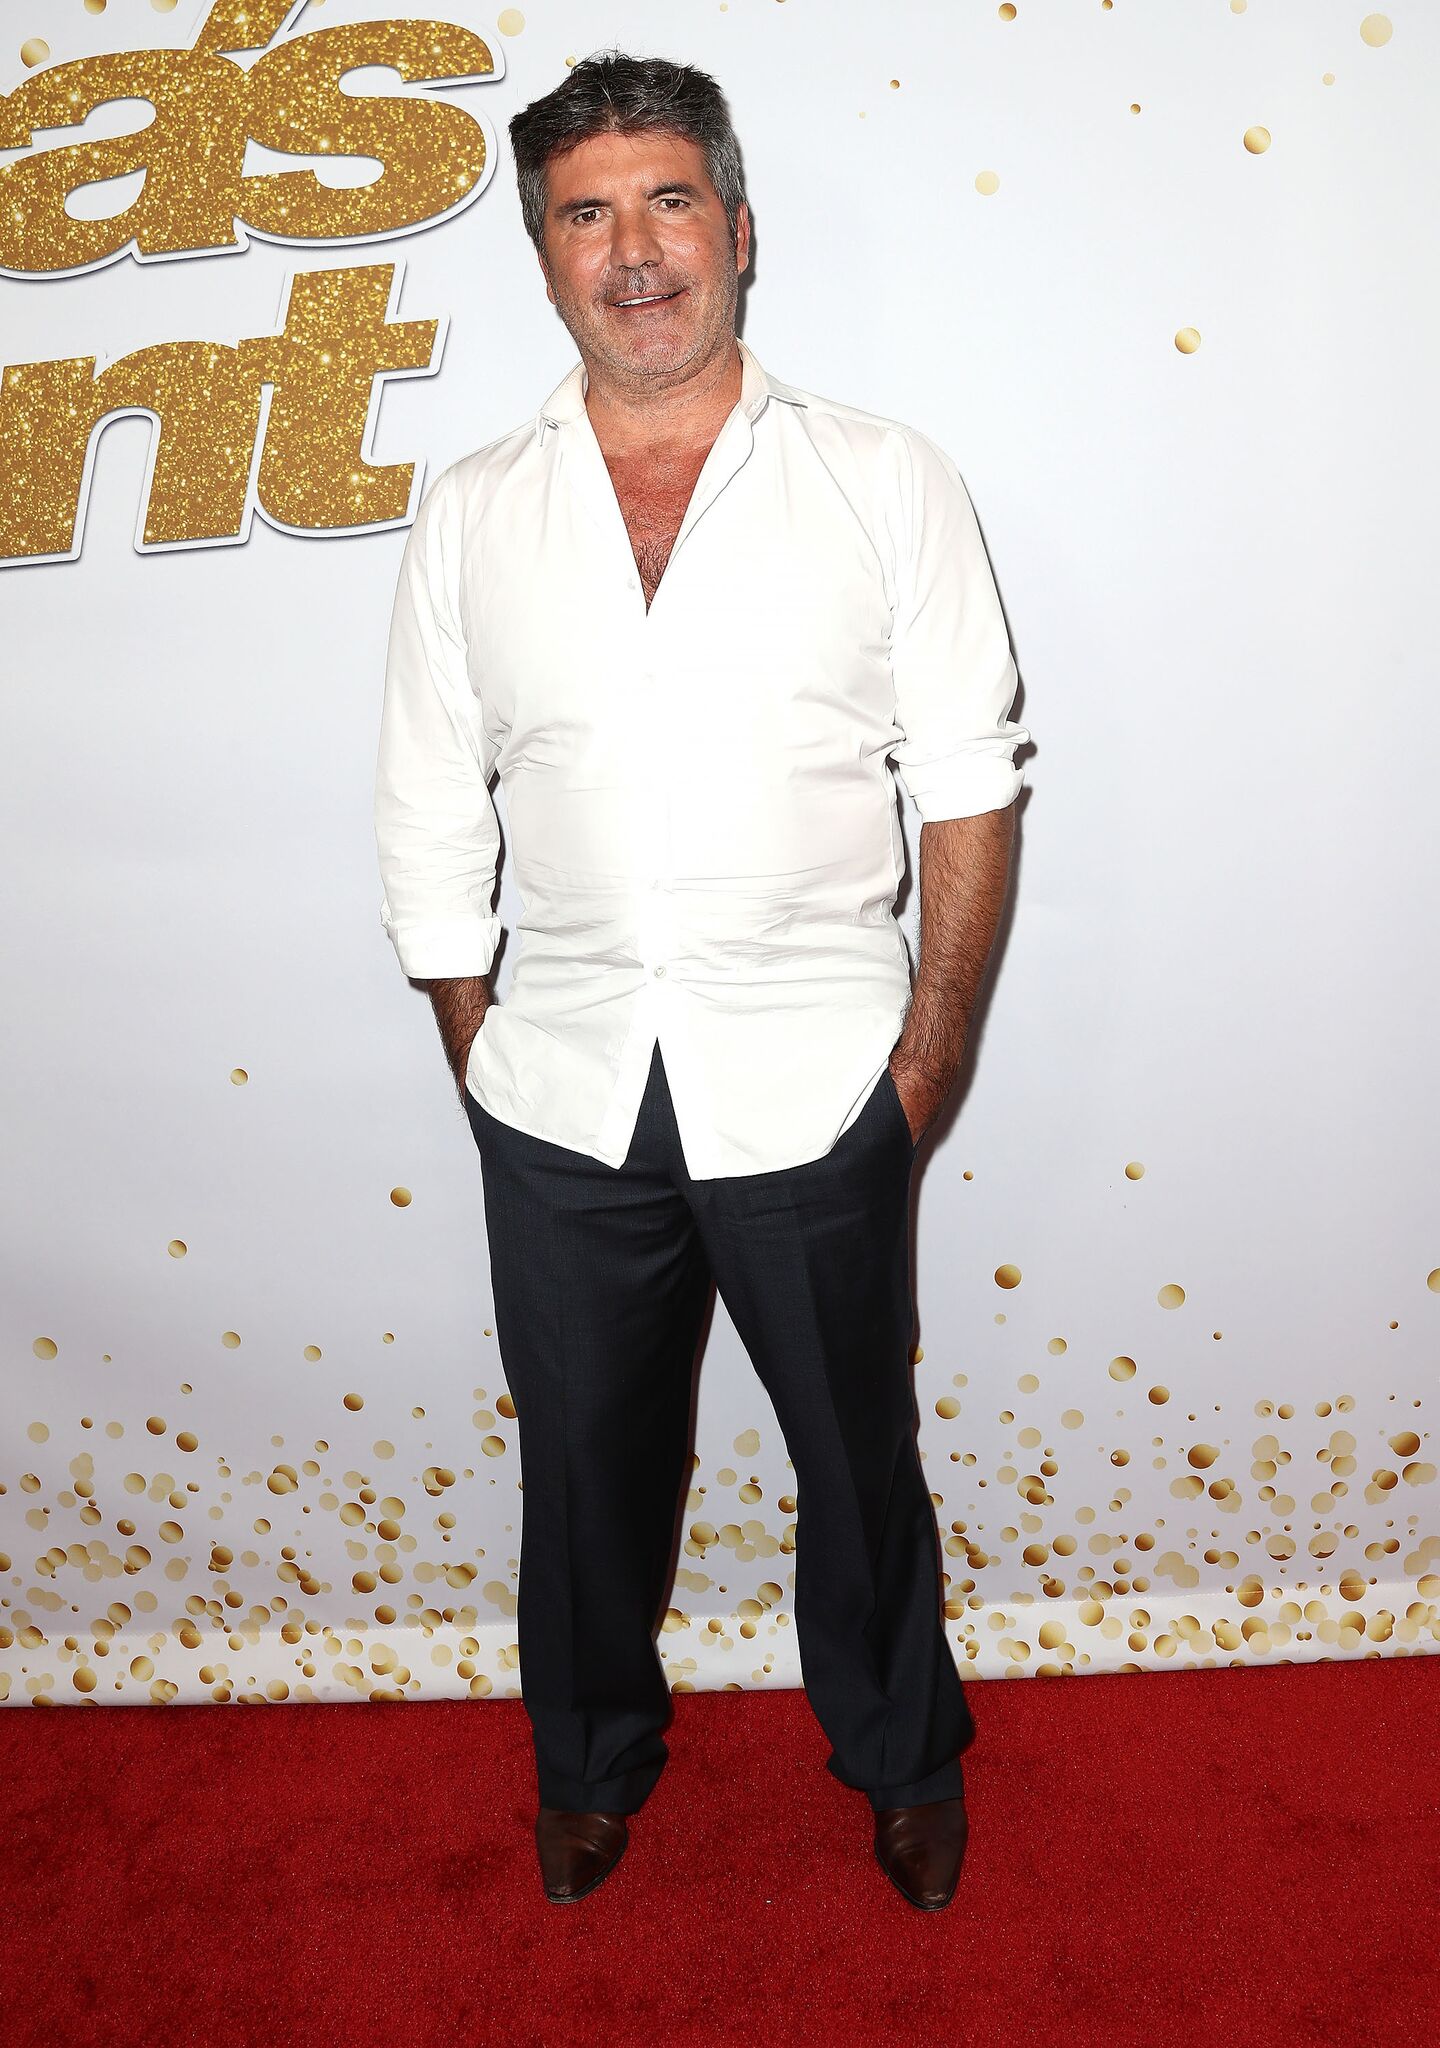 Simon Cowell attends the "America's Got Talent" Season 13 Live Show Red Carpet | Getty Images